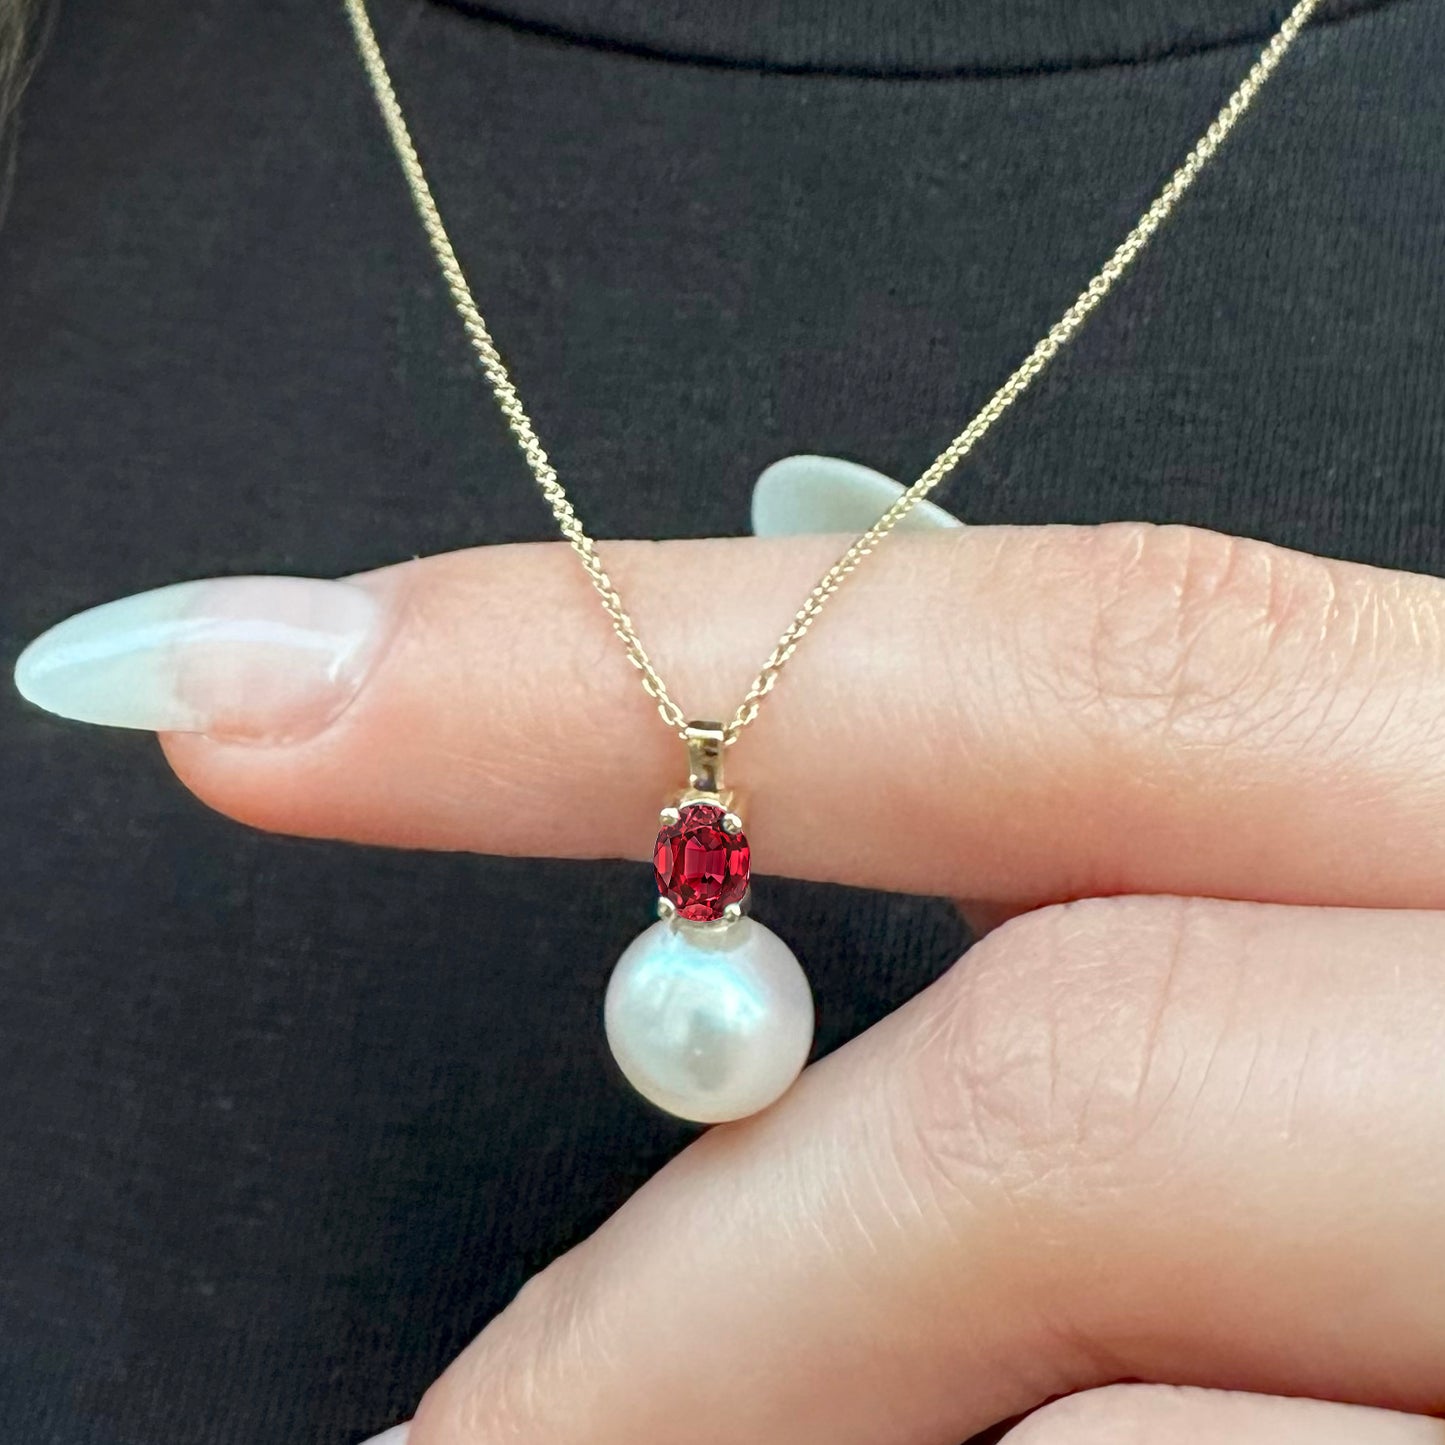 Bridal Jewelry Set of Pearl Necklace and Earring Pearl Necklace with Oval Cut Ruby Set in 14K Solid Gold Stud Earrings for Wedding